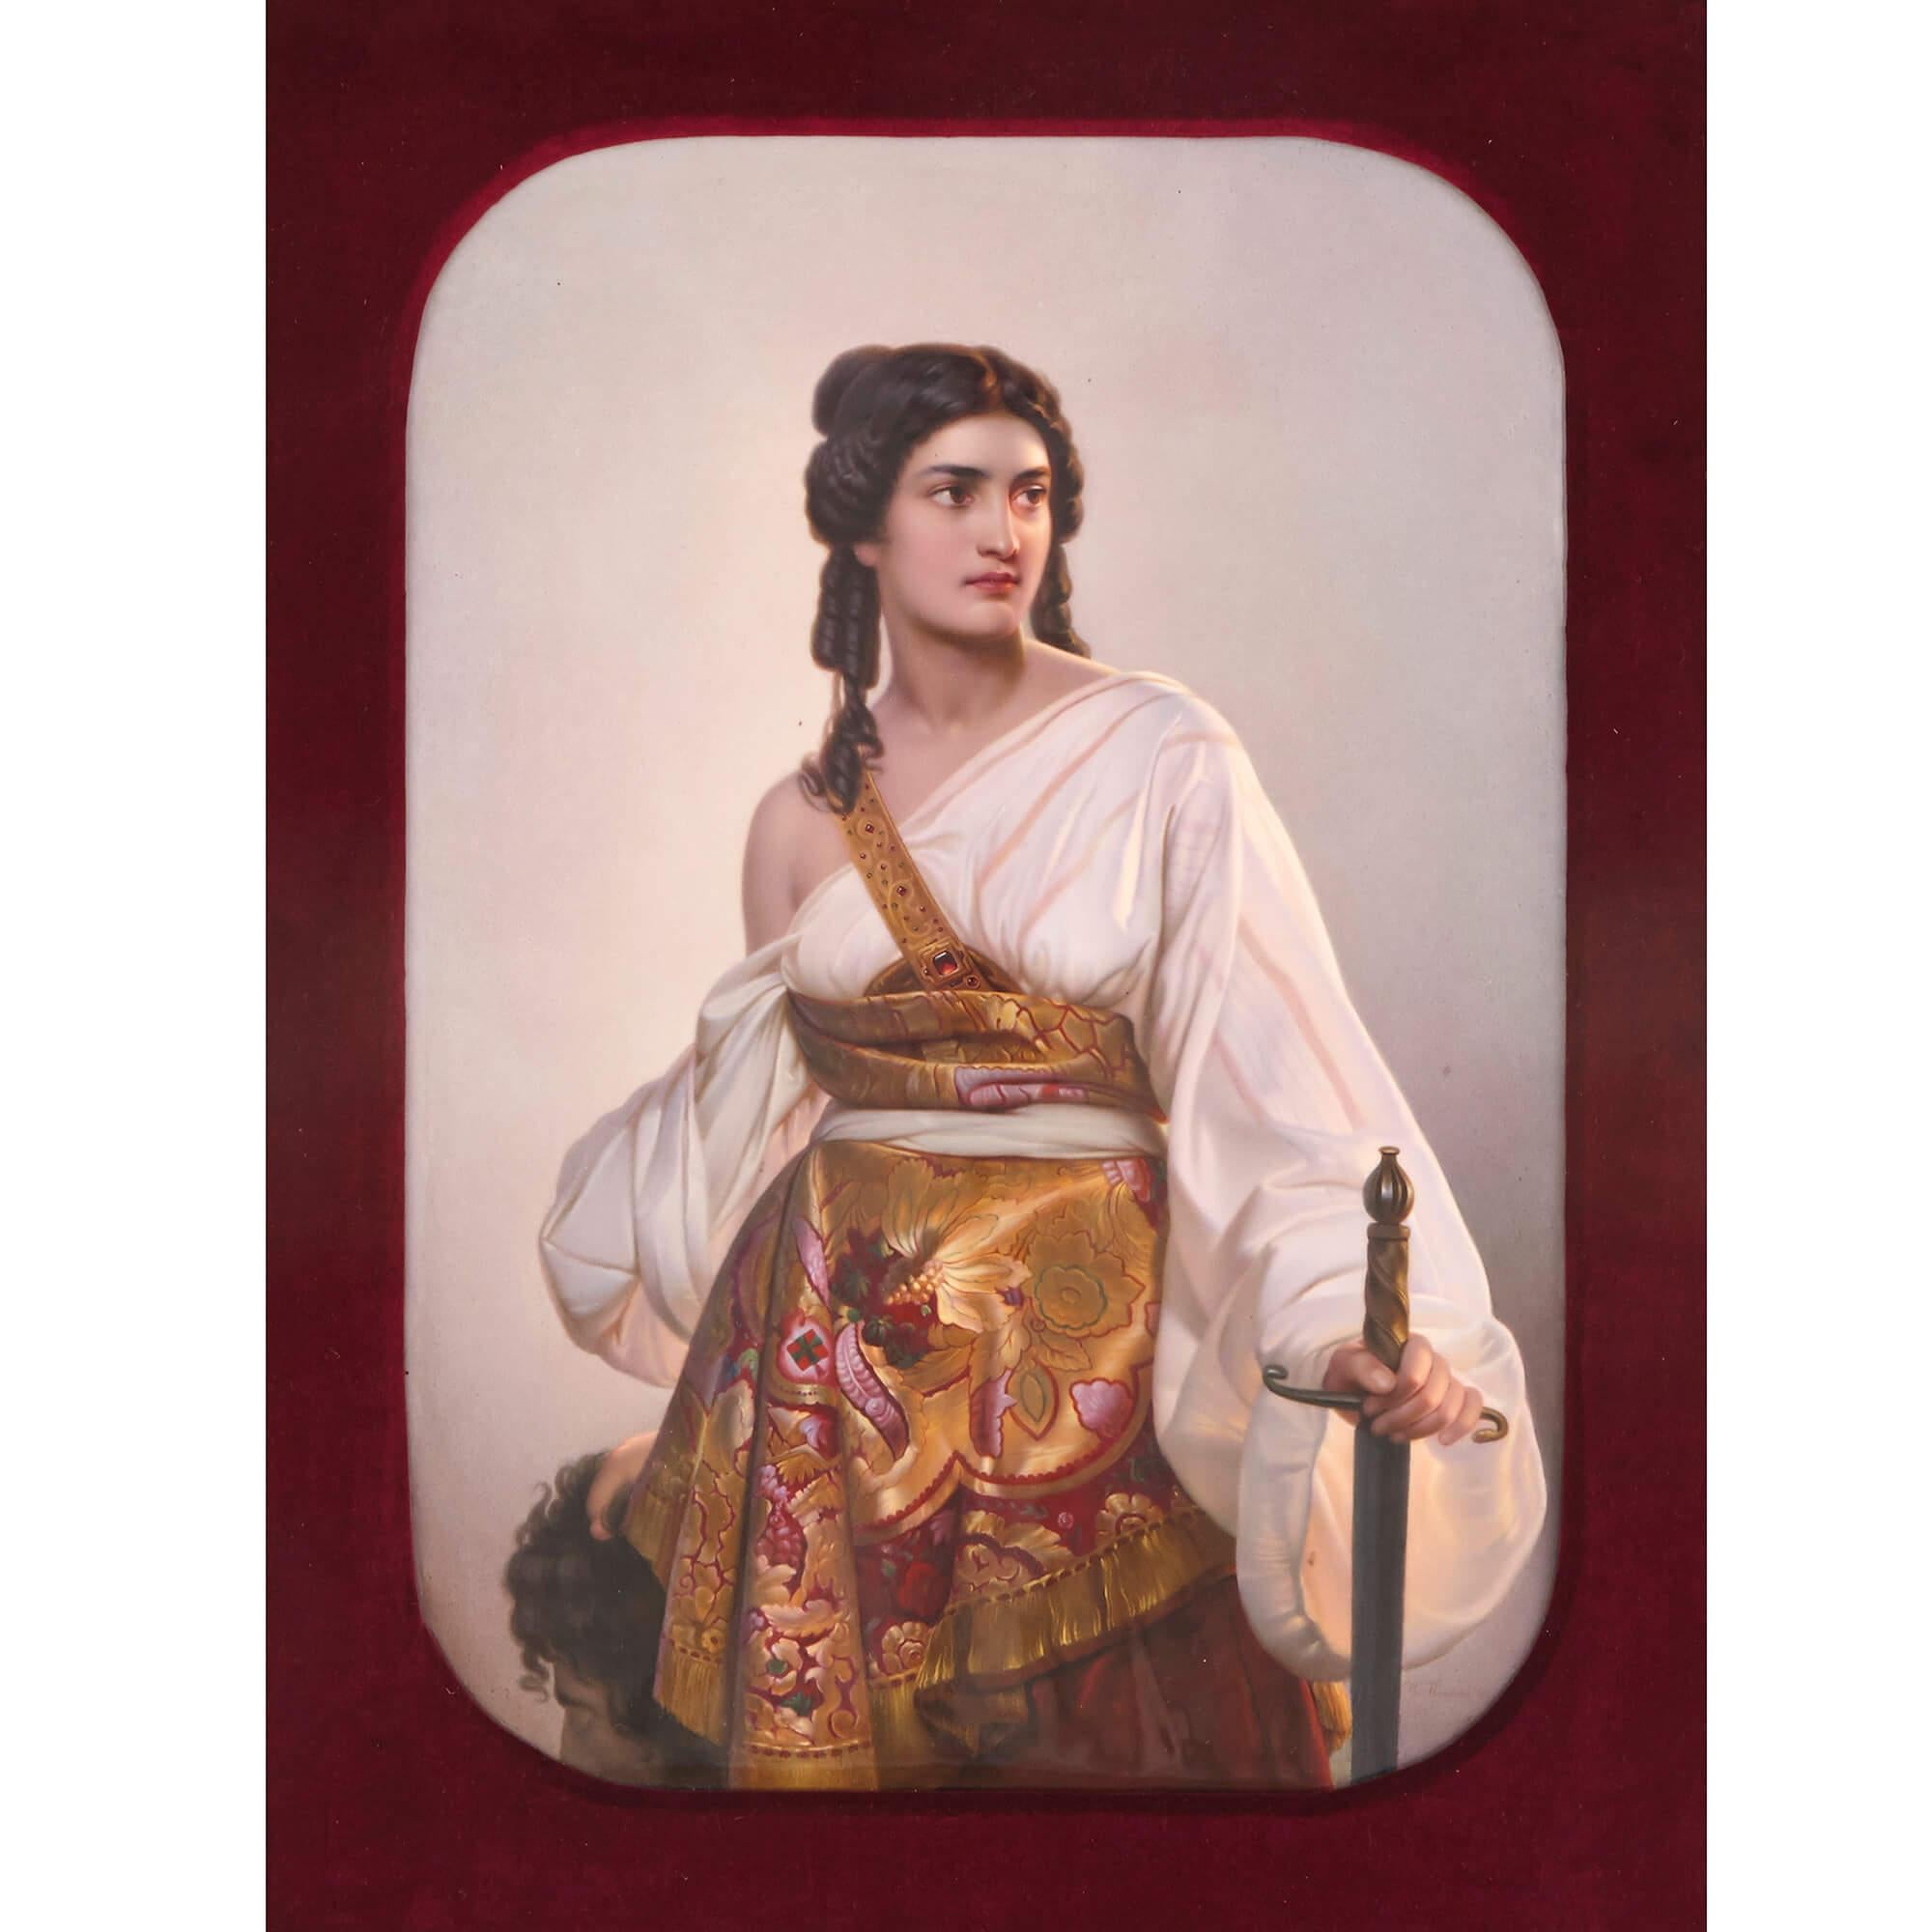 The image of Judith with the Head of Holofernes was a powerful source of inspiration for many of great European artists, and was captured superbly in August Riedel's masterpiece, after which this beautiful KPM porcelain plaque has been made. The